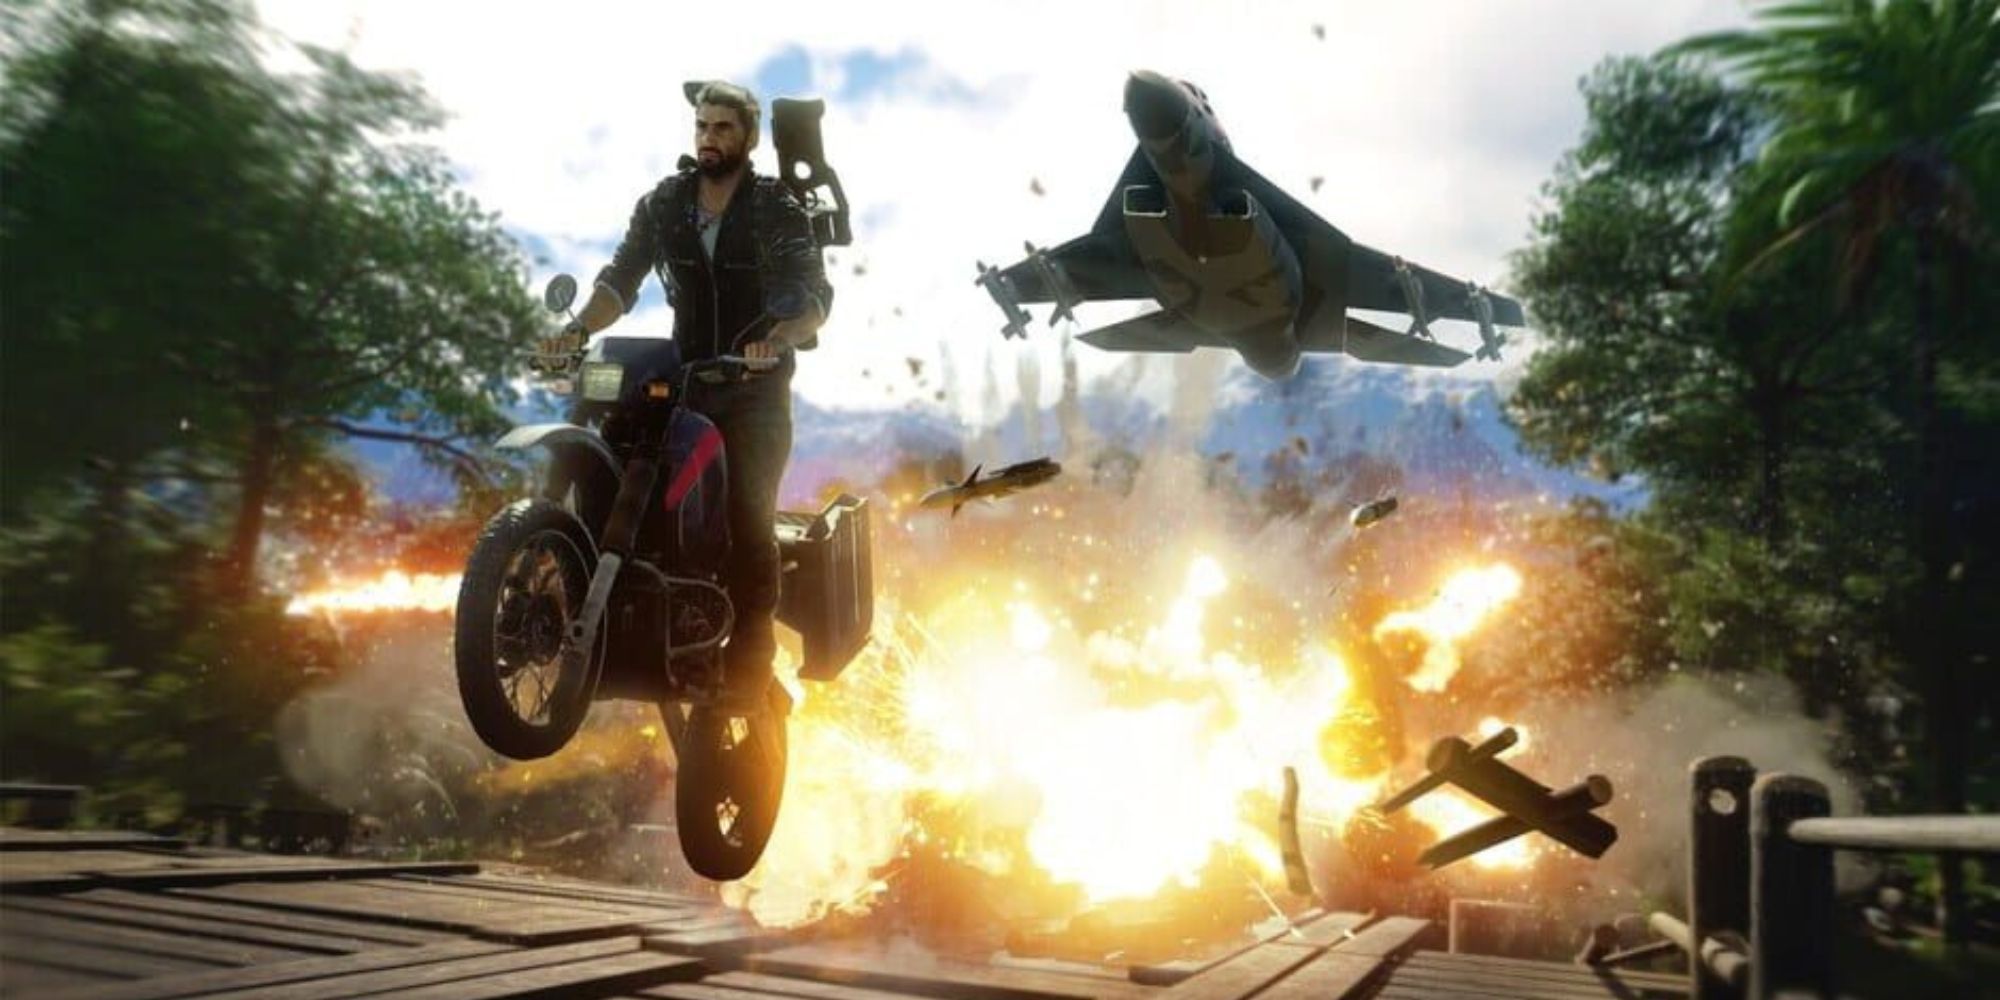 Rico drives a motorcycle away from an explosion as he is pursued by a plane